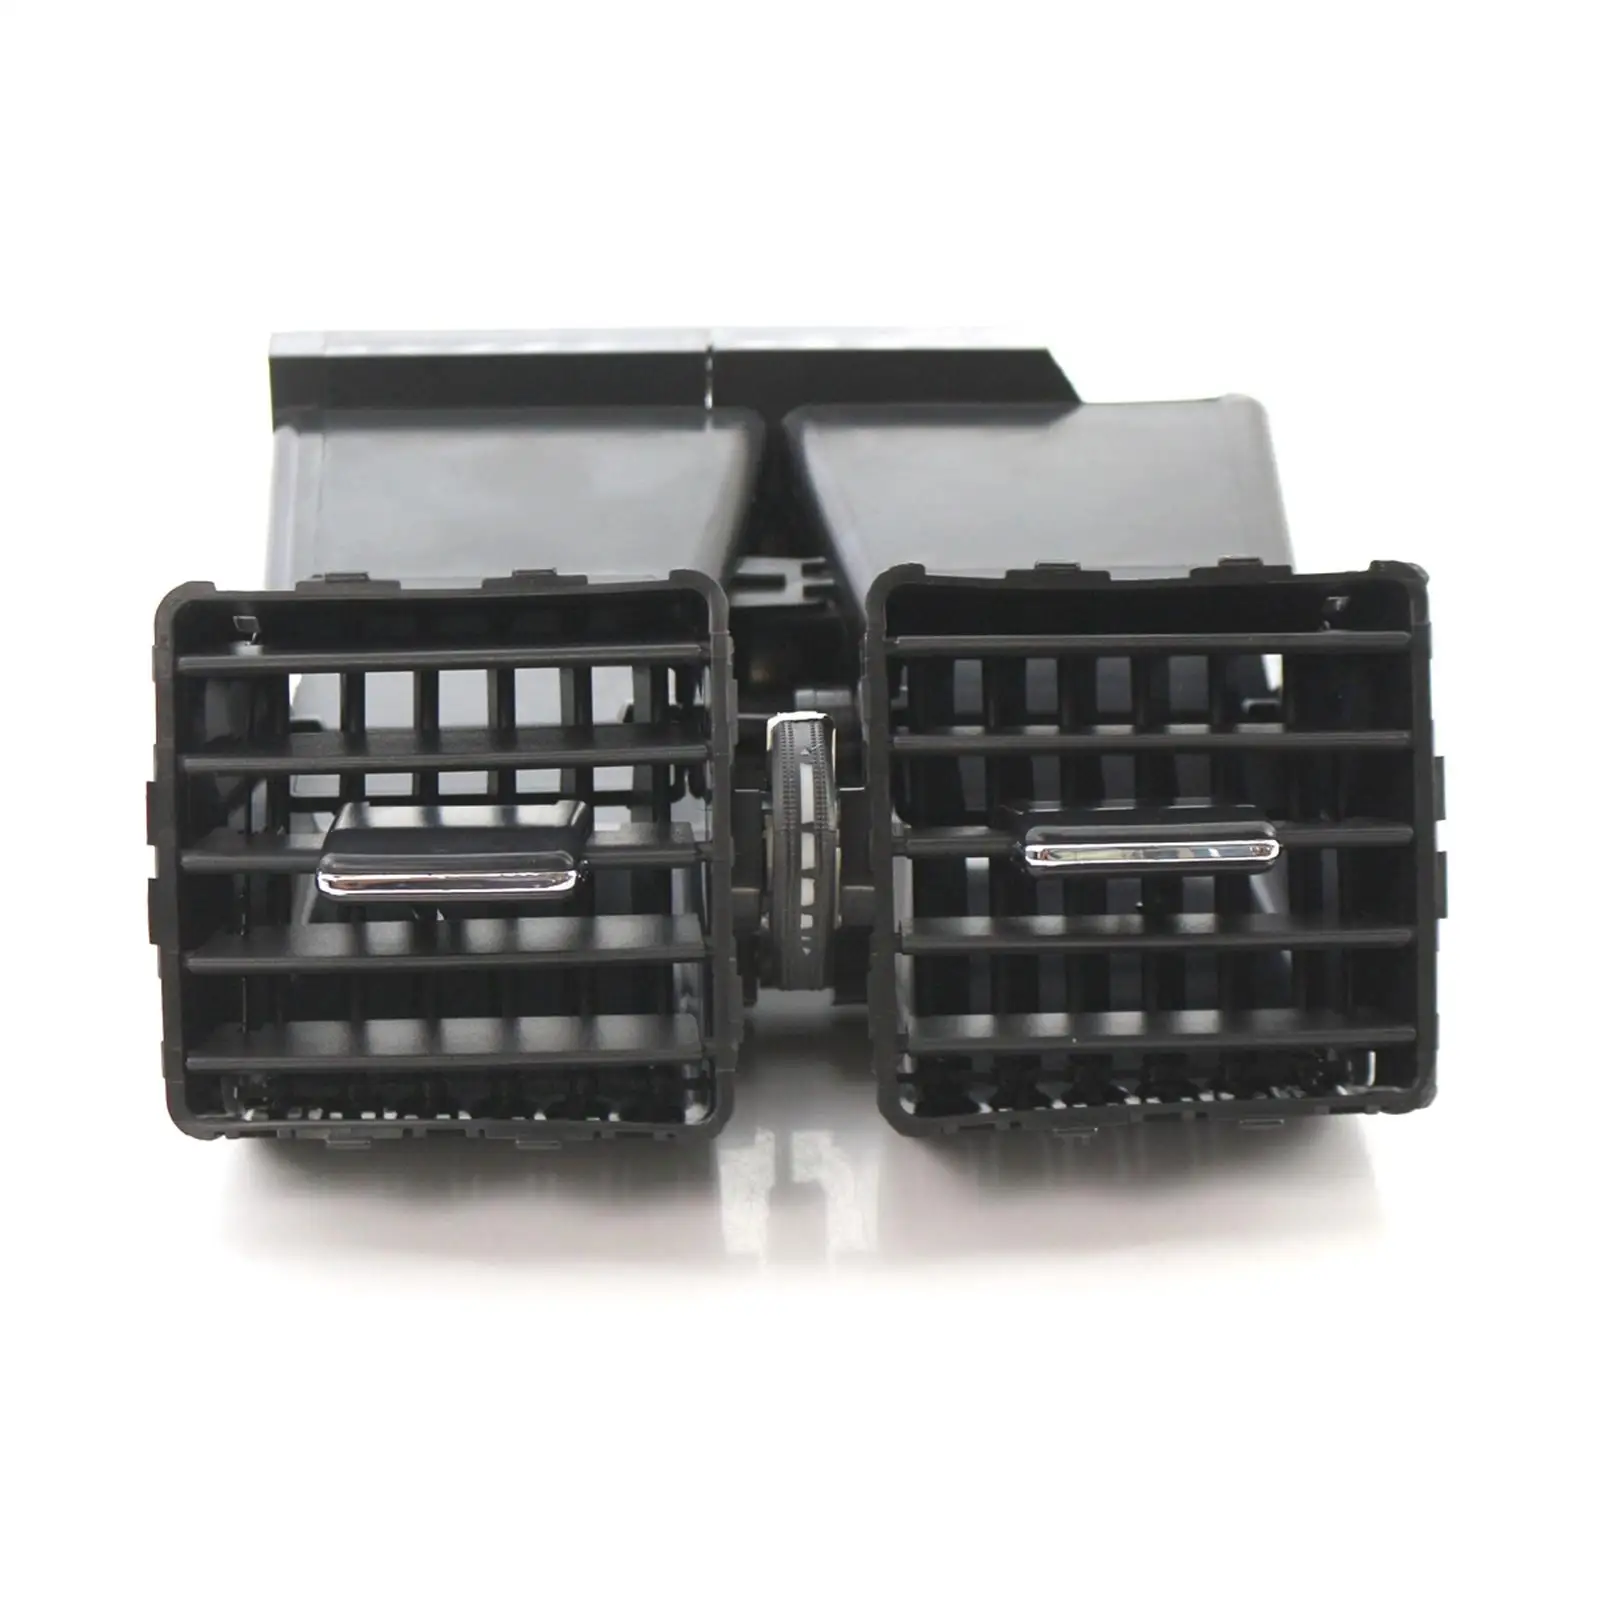  Vent Assembly Replacement 16683005542A17 Conditioning Grilles Panels Ventilation Fits for  W166 W292 ml GL GLE 2012